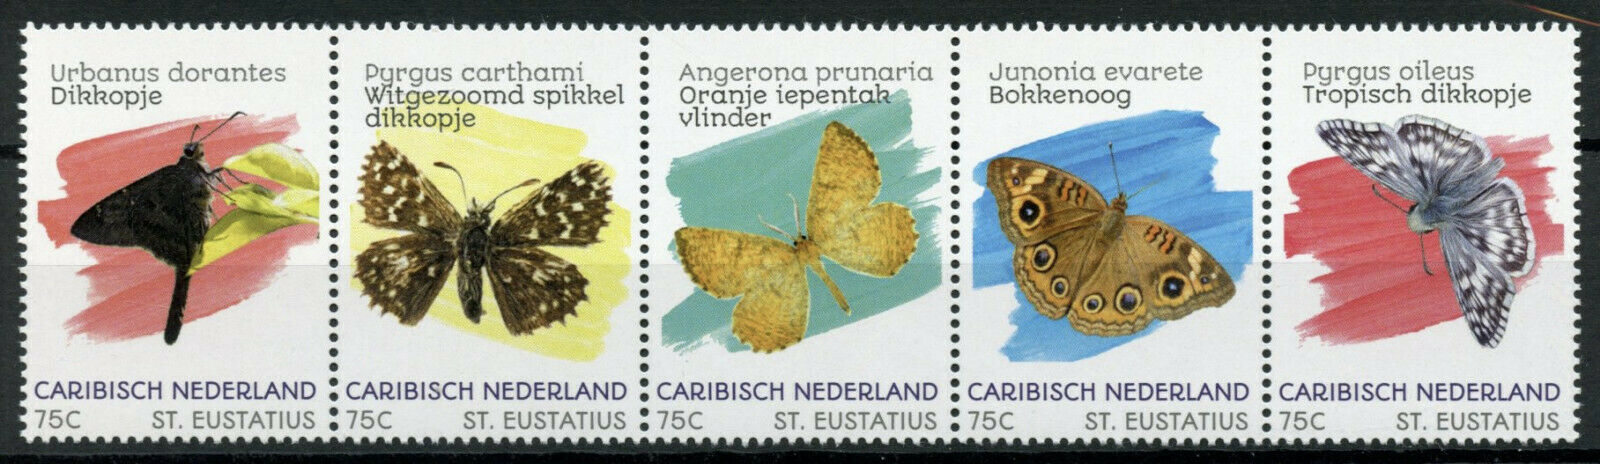 St Eustatius Caribbean Netherlands Butterflies Stamps 2020 MNH Insects 5v Strip